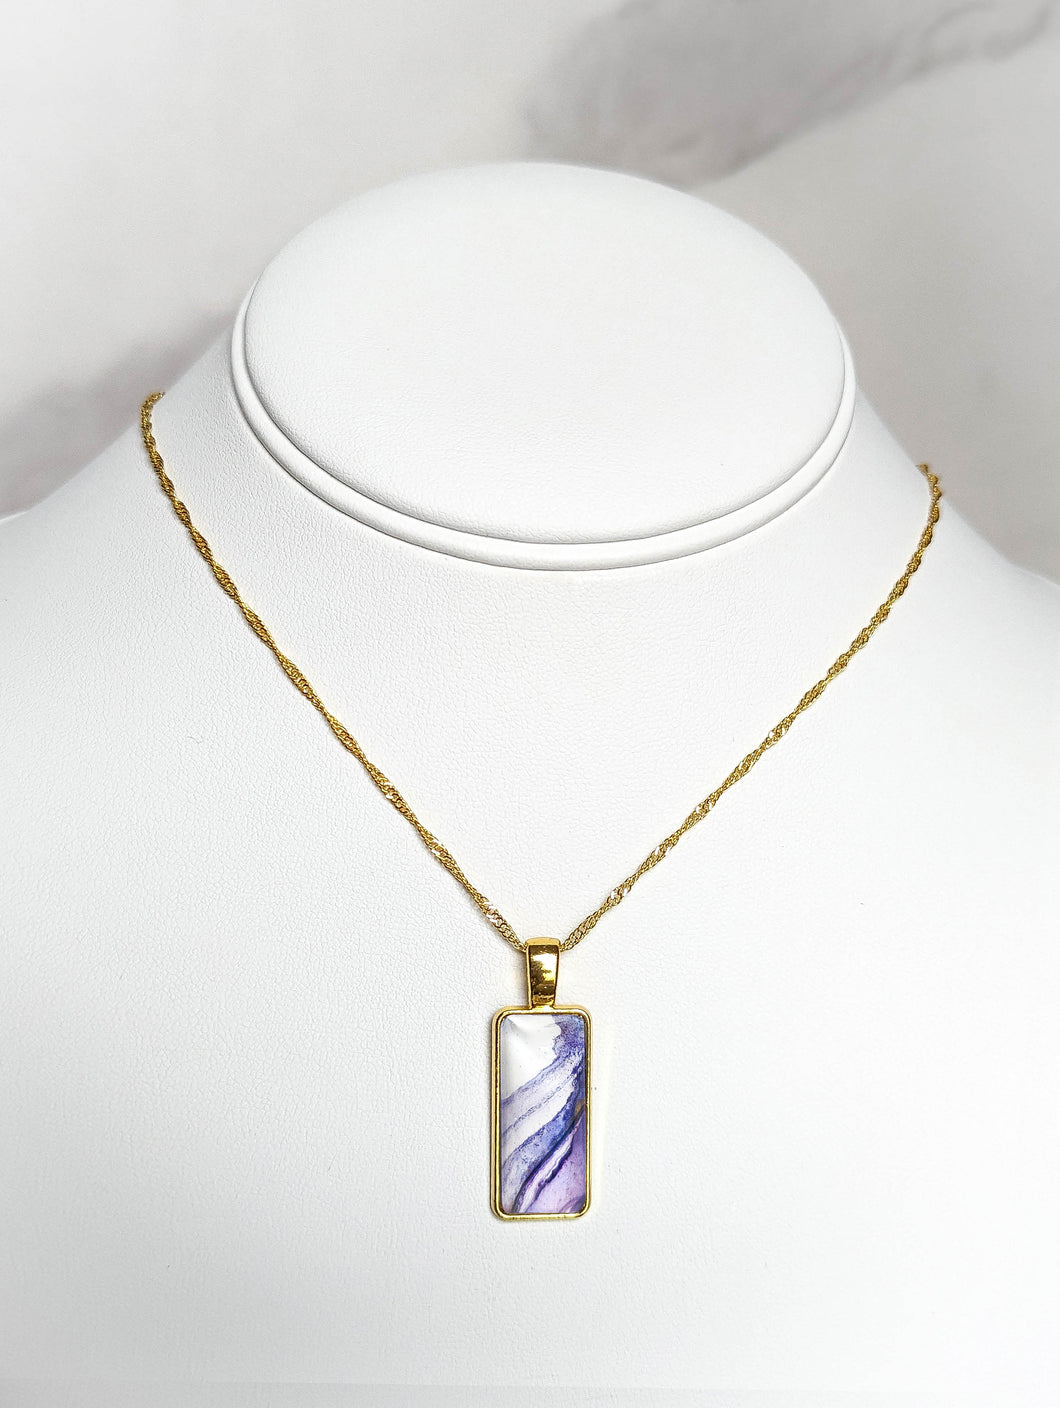 Hand painted alcohol ink pendant necklace